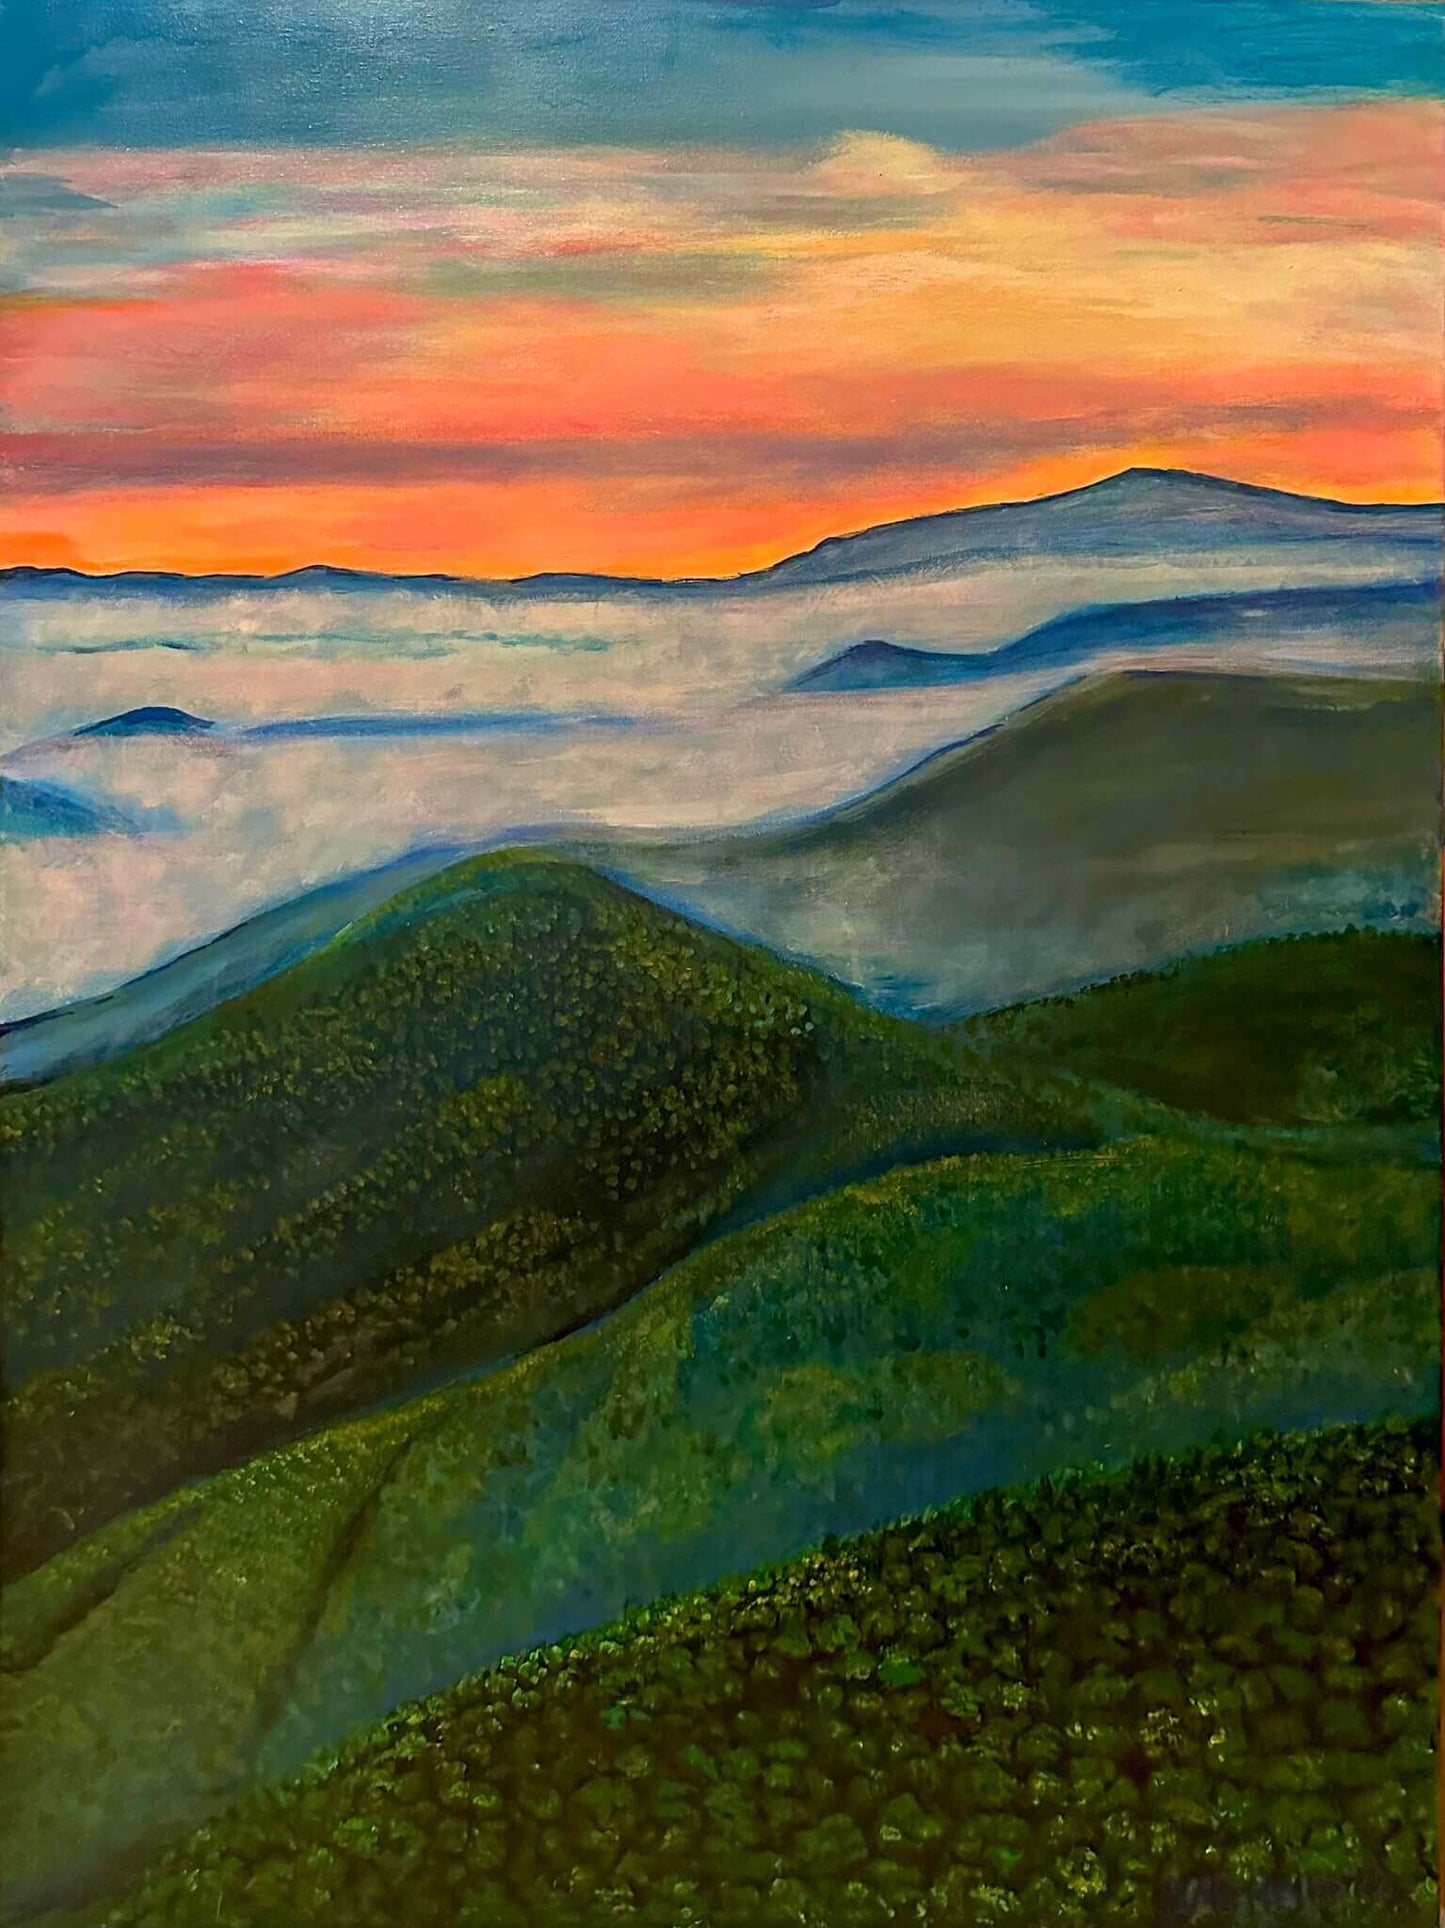 acrylic painting of a sunset over the mountains